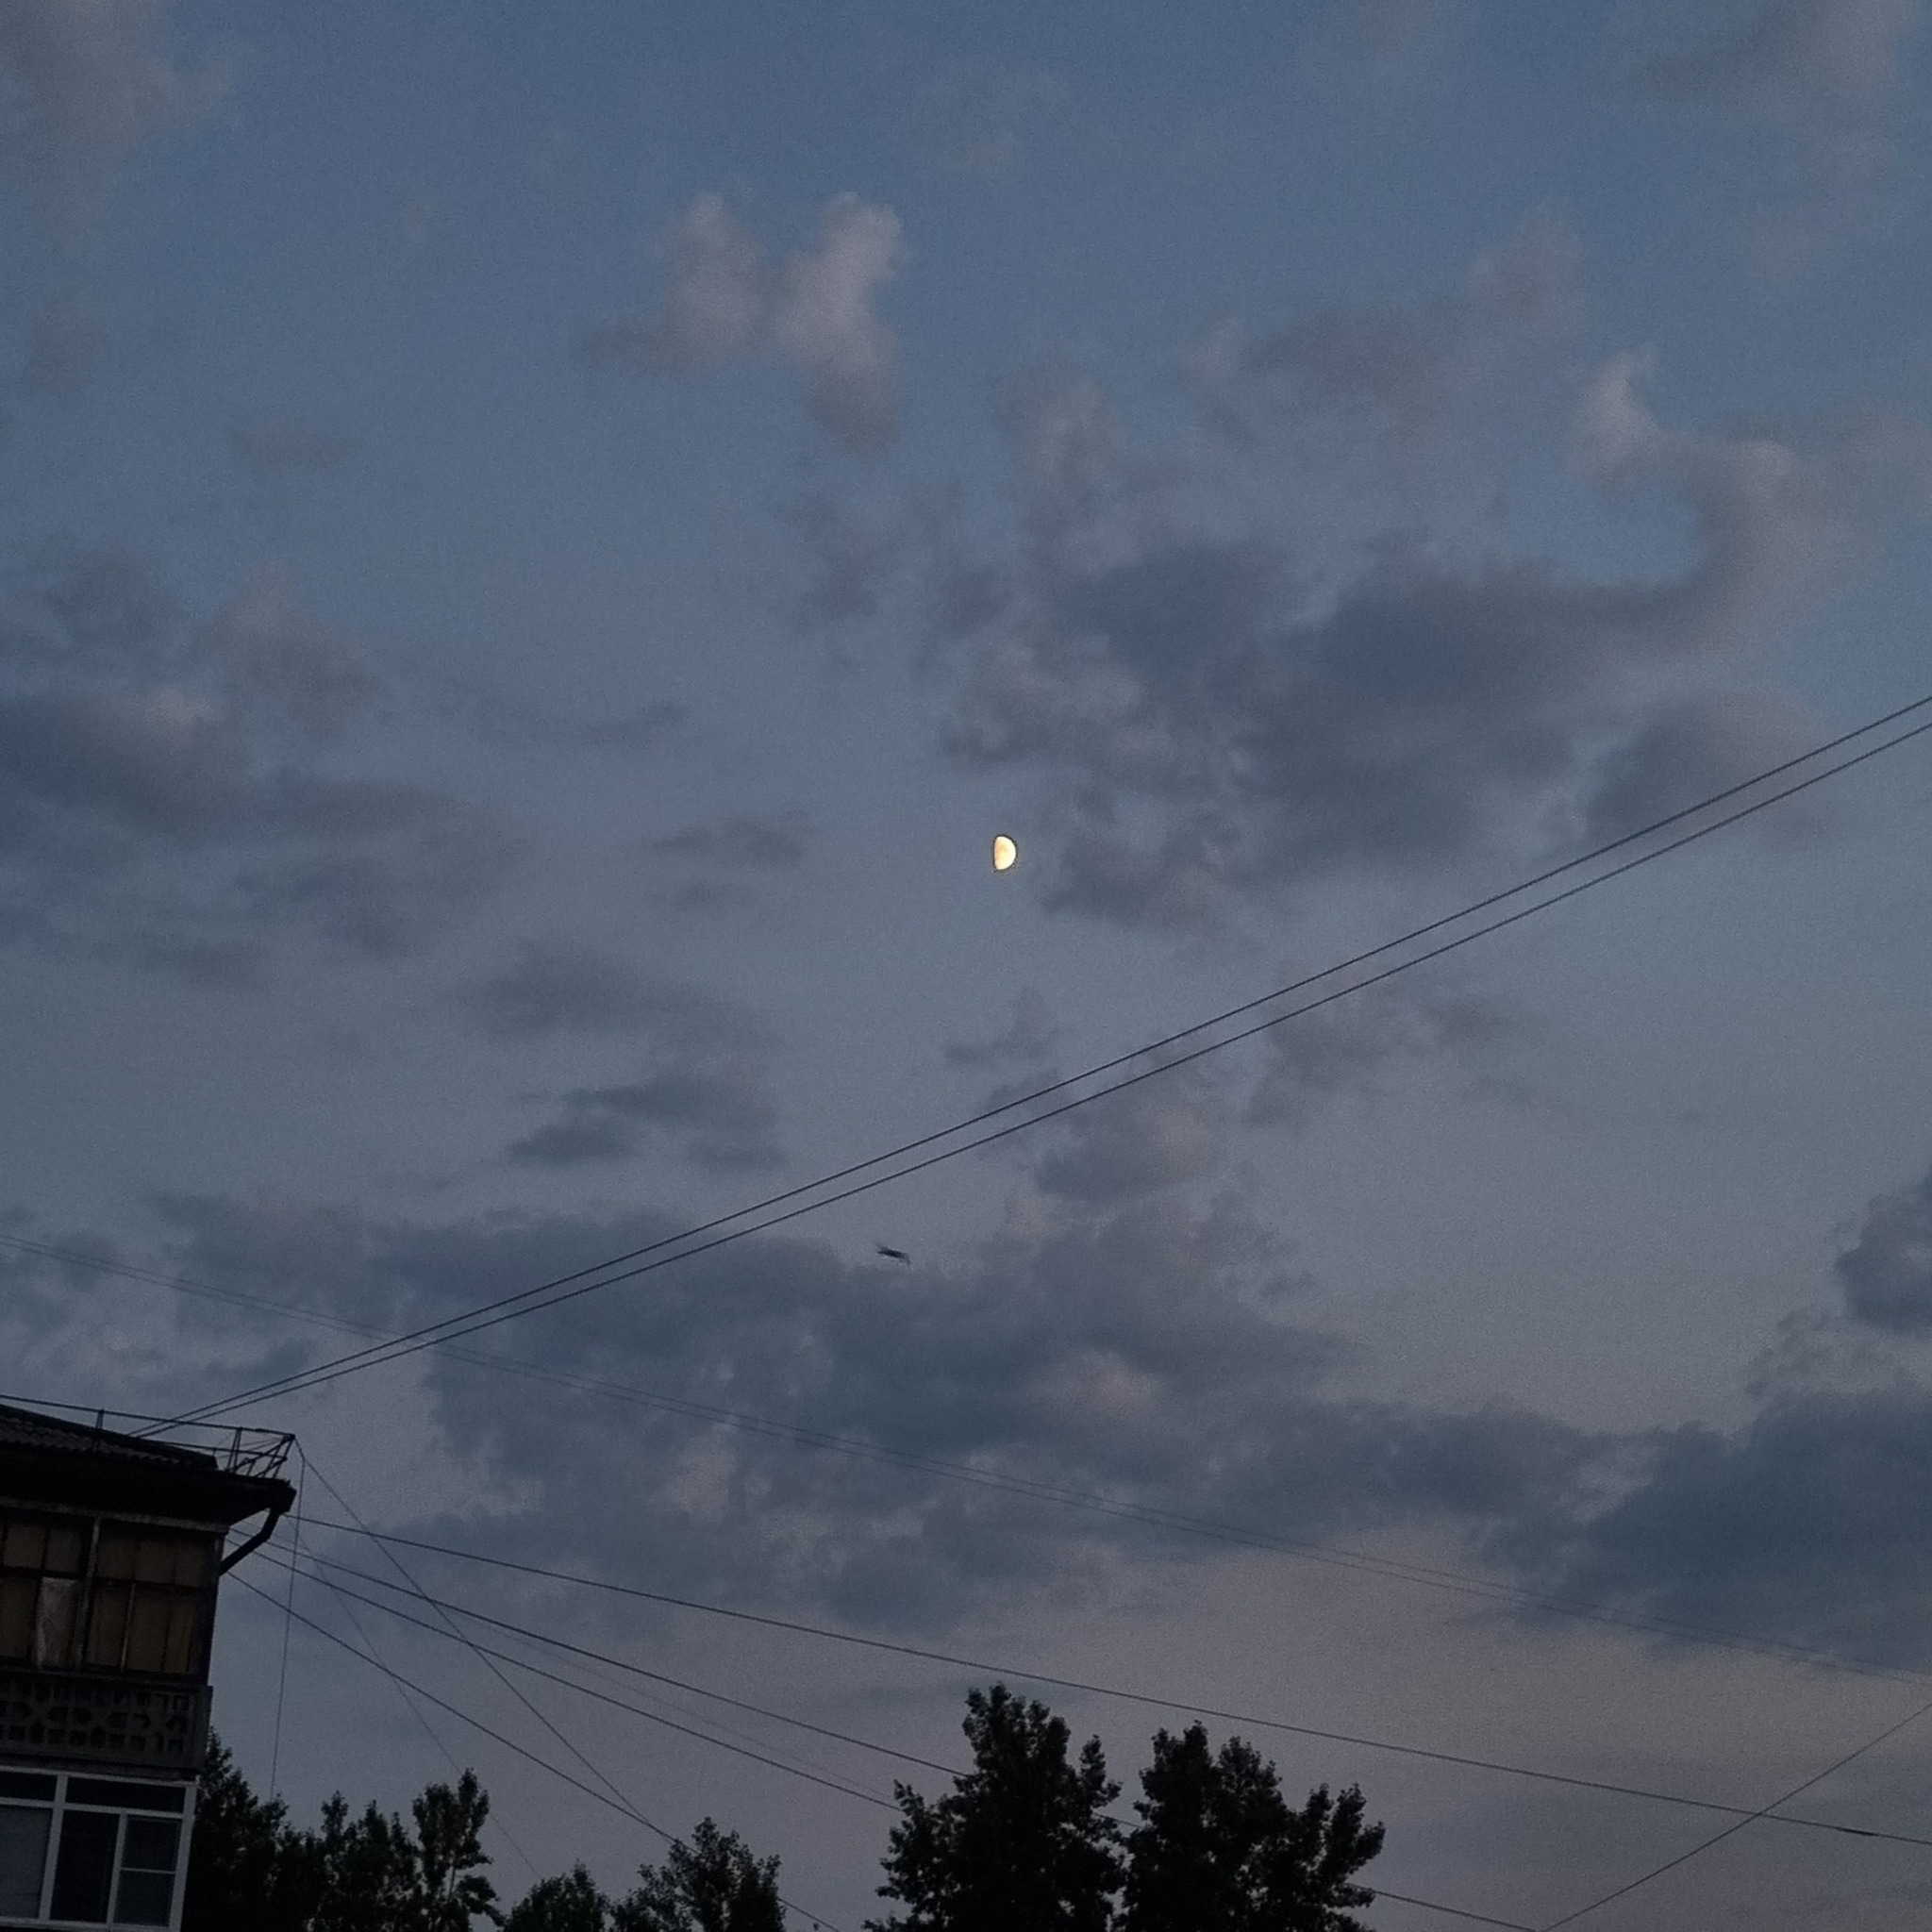 Well, anyway, here's a nice photo... - My, Aesthetics, Sunset, moon, The photo, Night city, Sky, Clouds